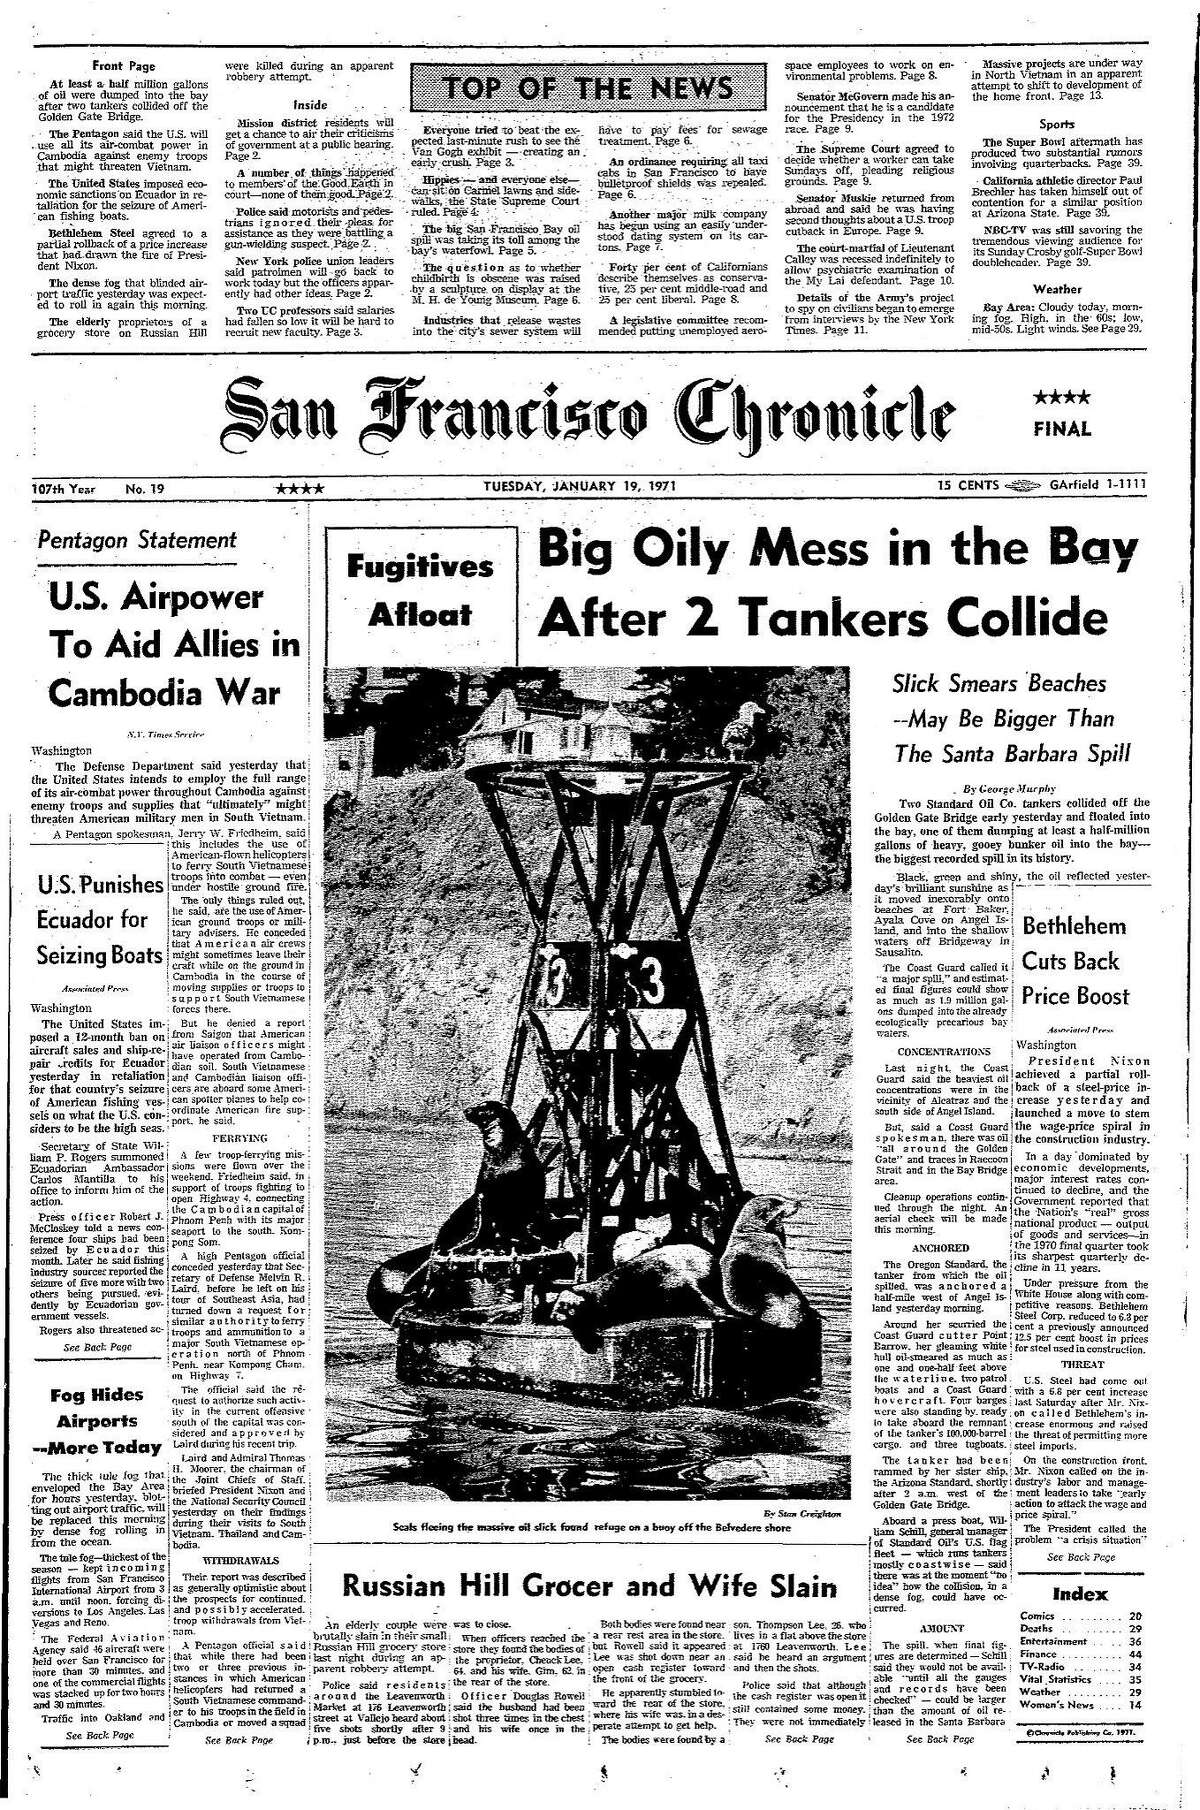 Historic Chronicle Front Page January 19, 1971 2 Oil tankers collide in the bay .. Chron365, Chroncover